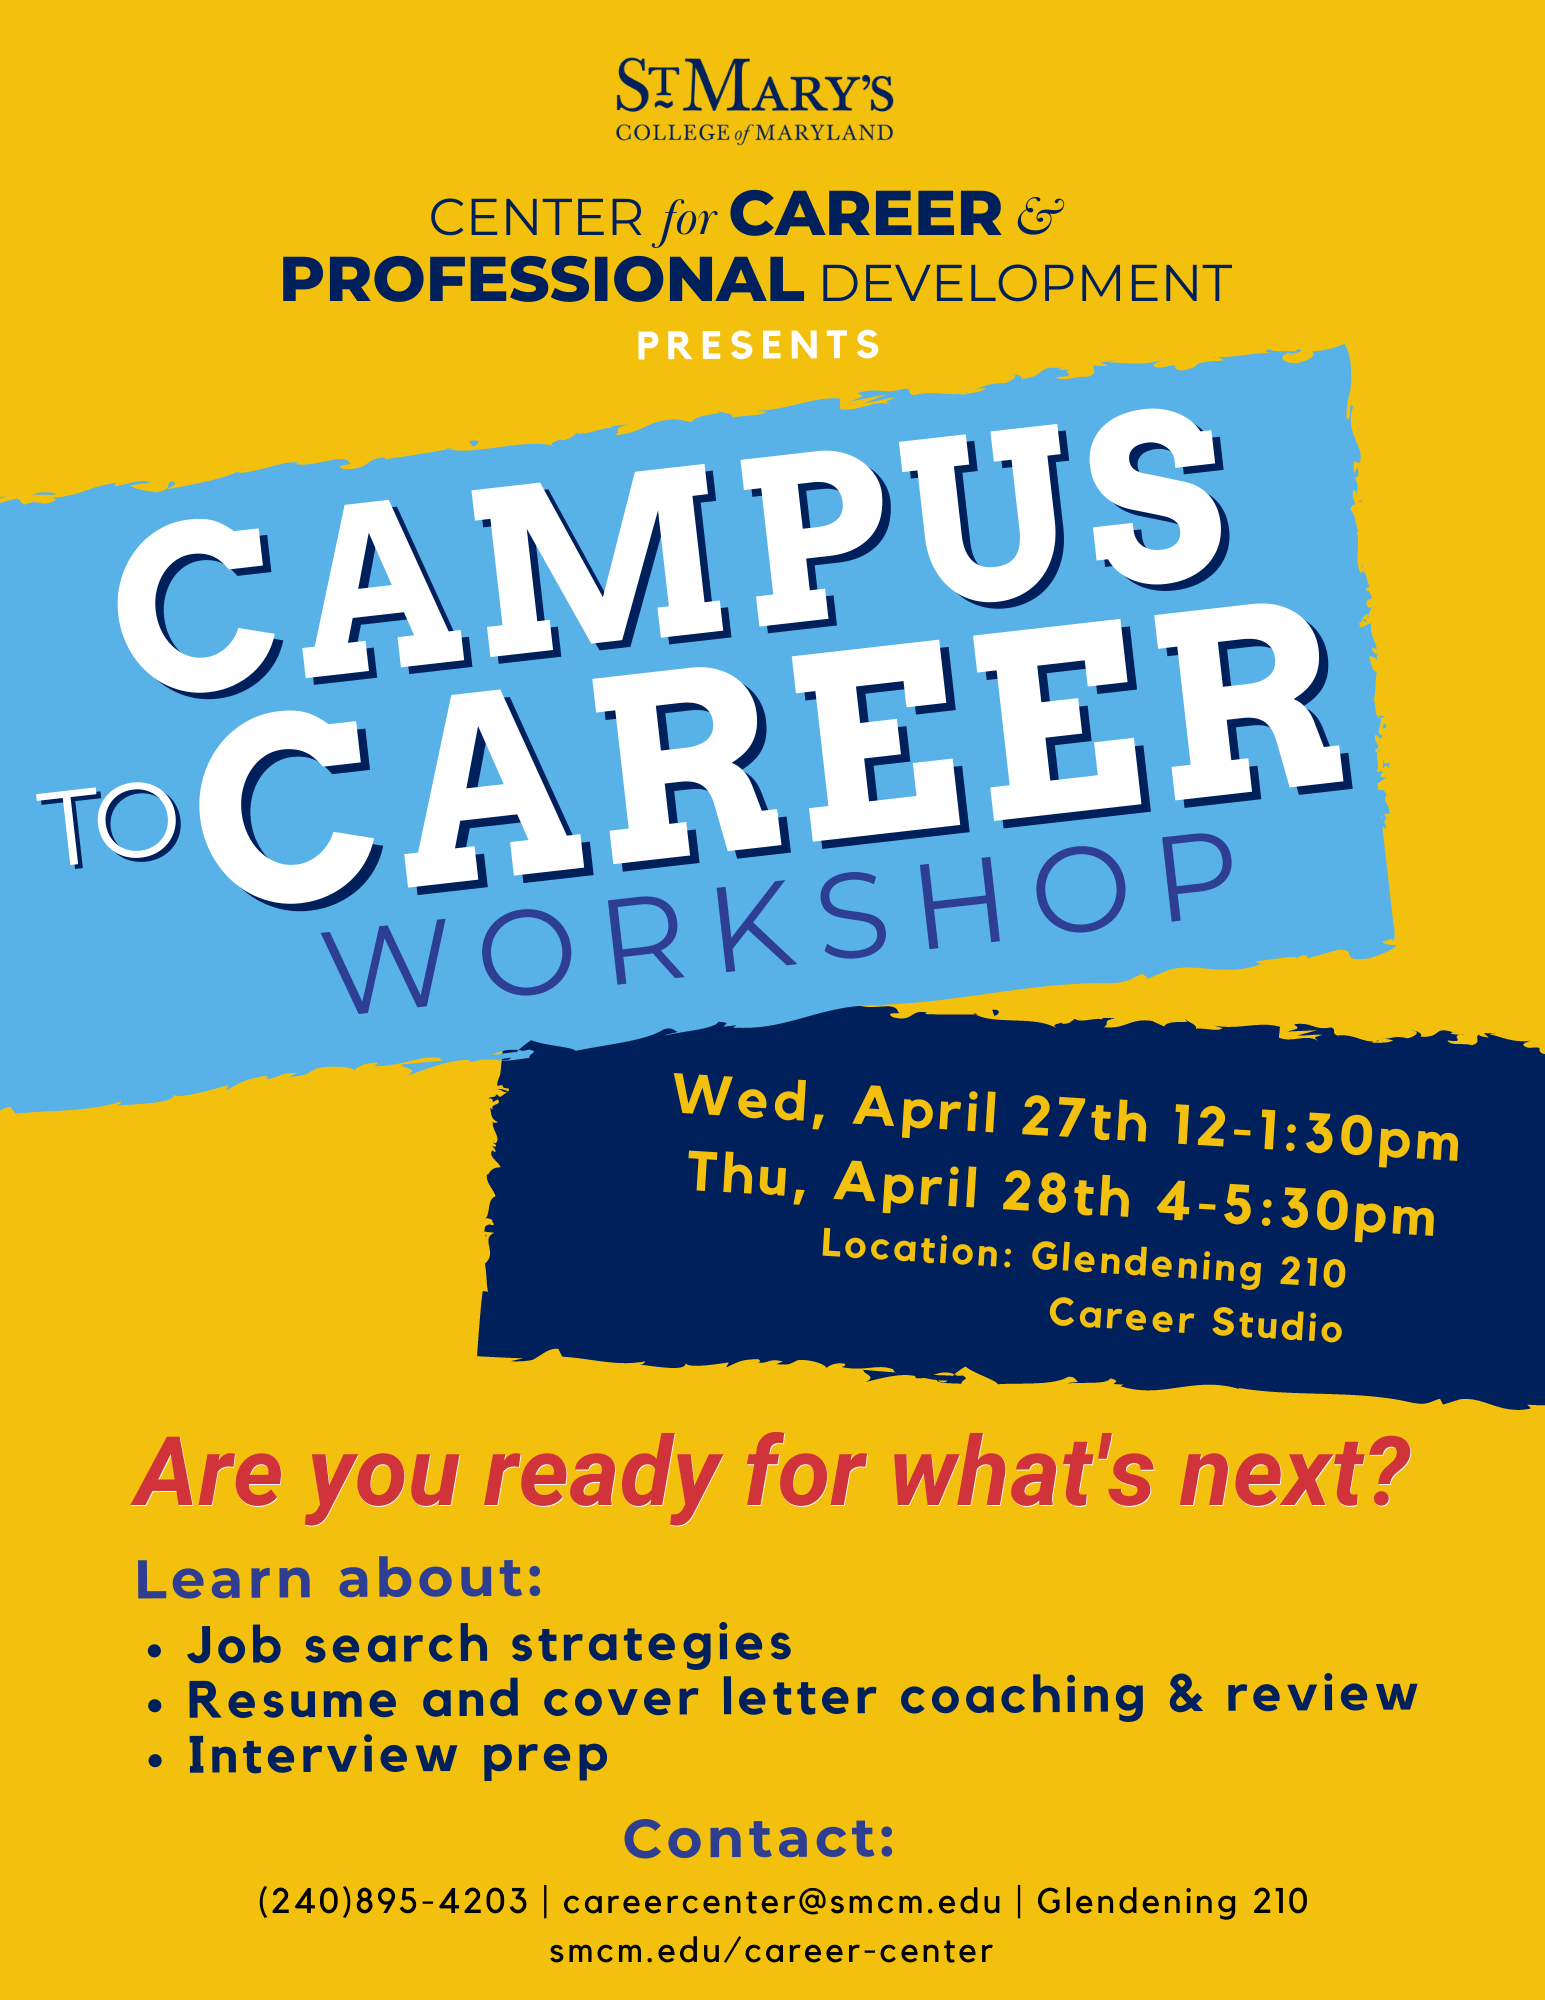 Campus to Career workshops-learn about job search strategies, networking, interview prep, and resume/cover letter coaching and review!